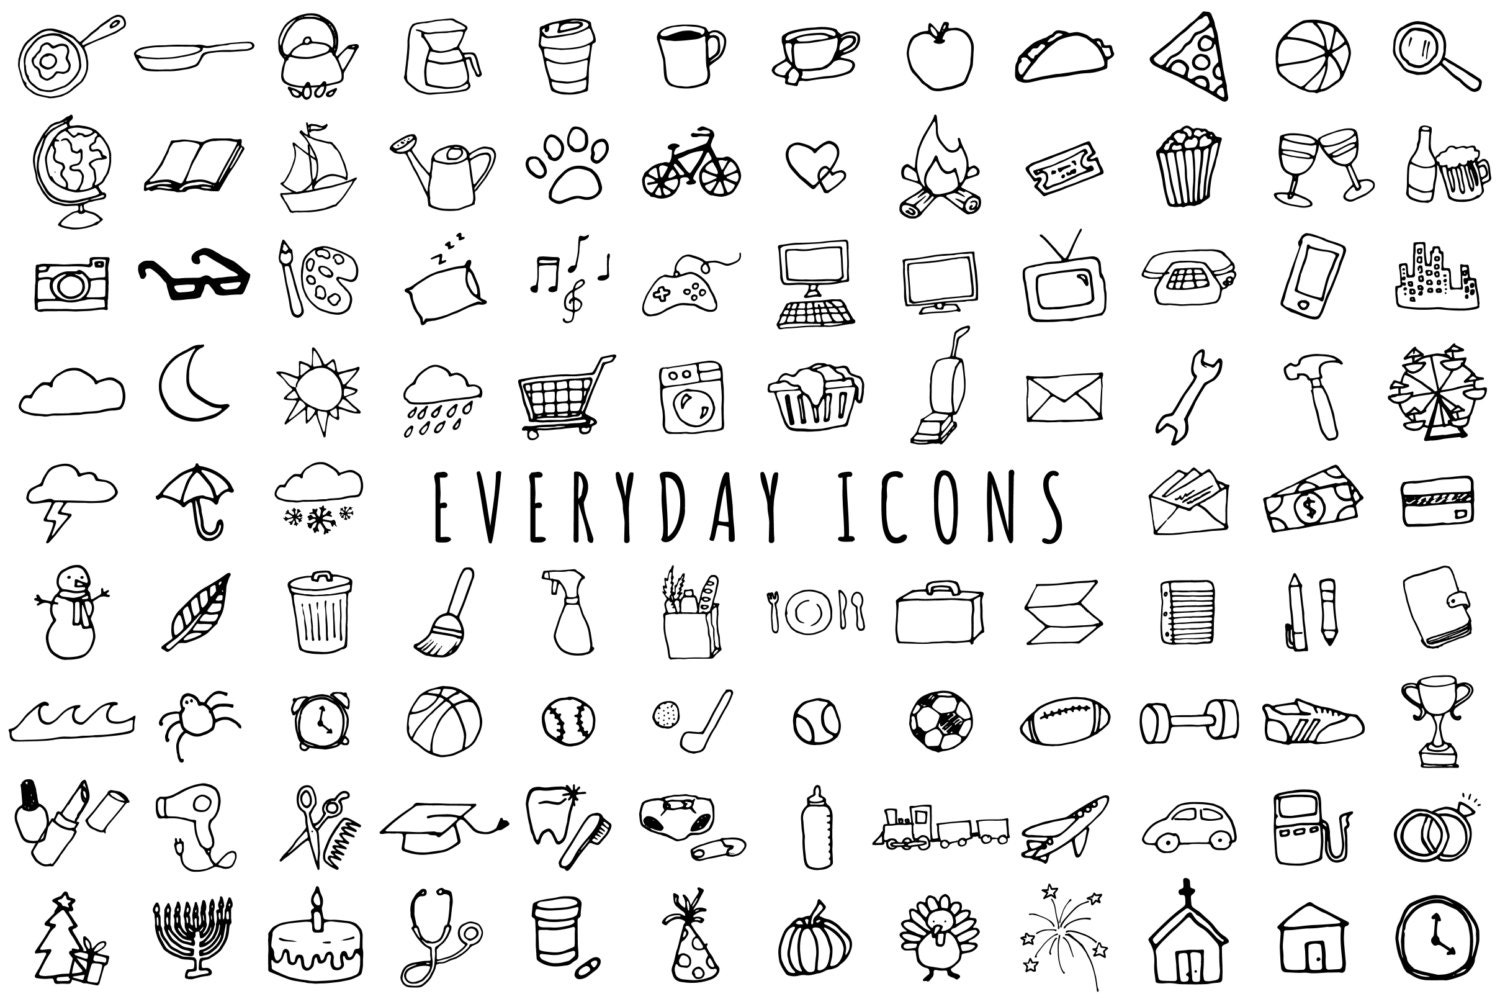 Everyday Items Clipart Set Black & White Version clipart